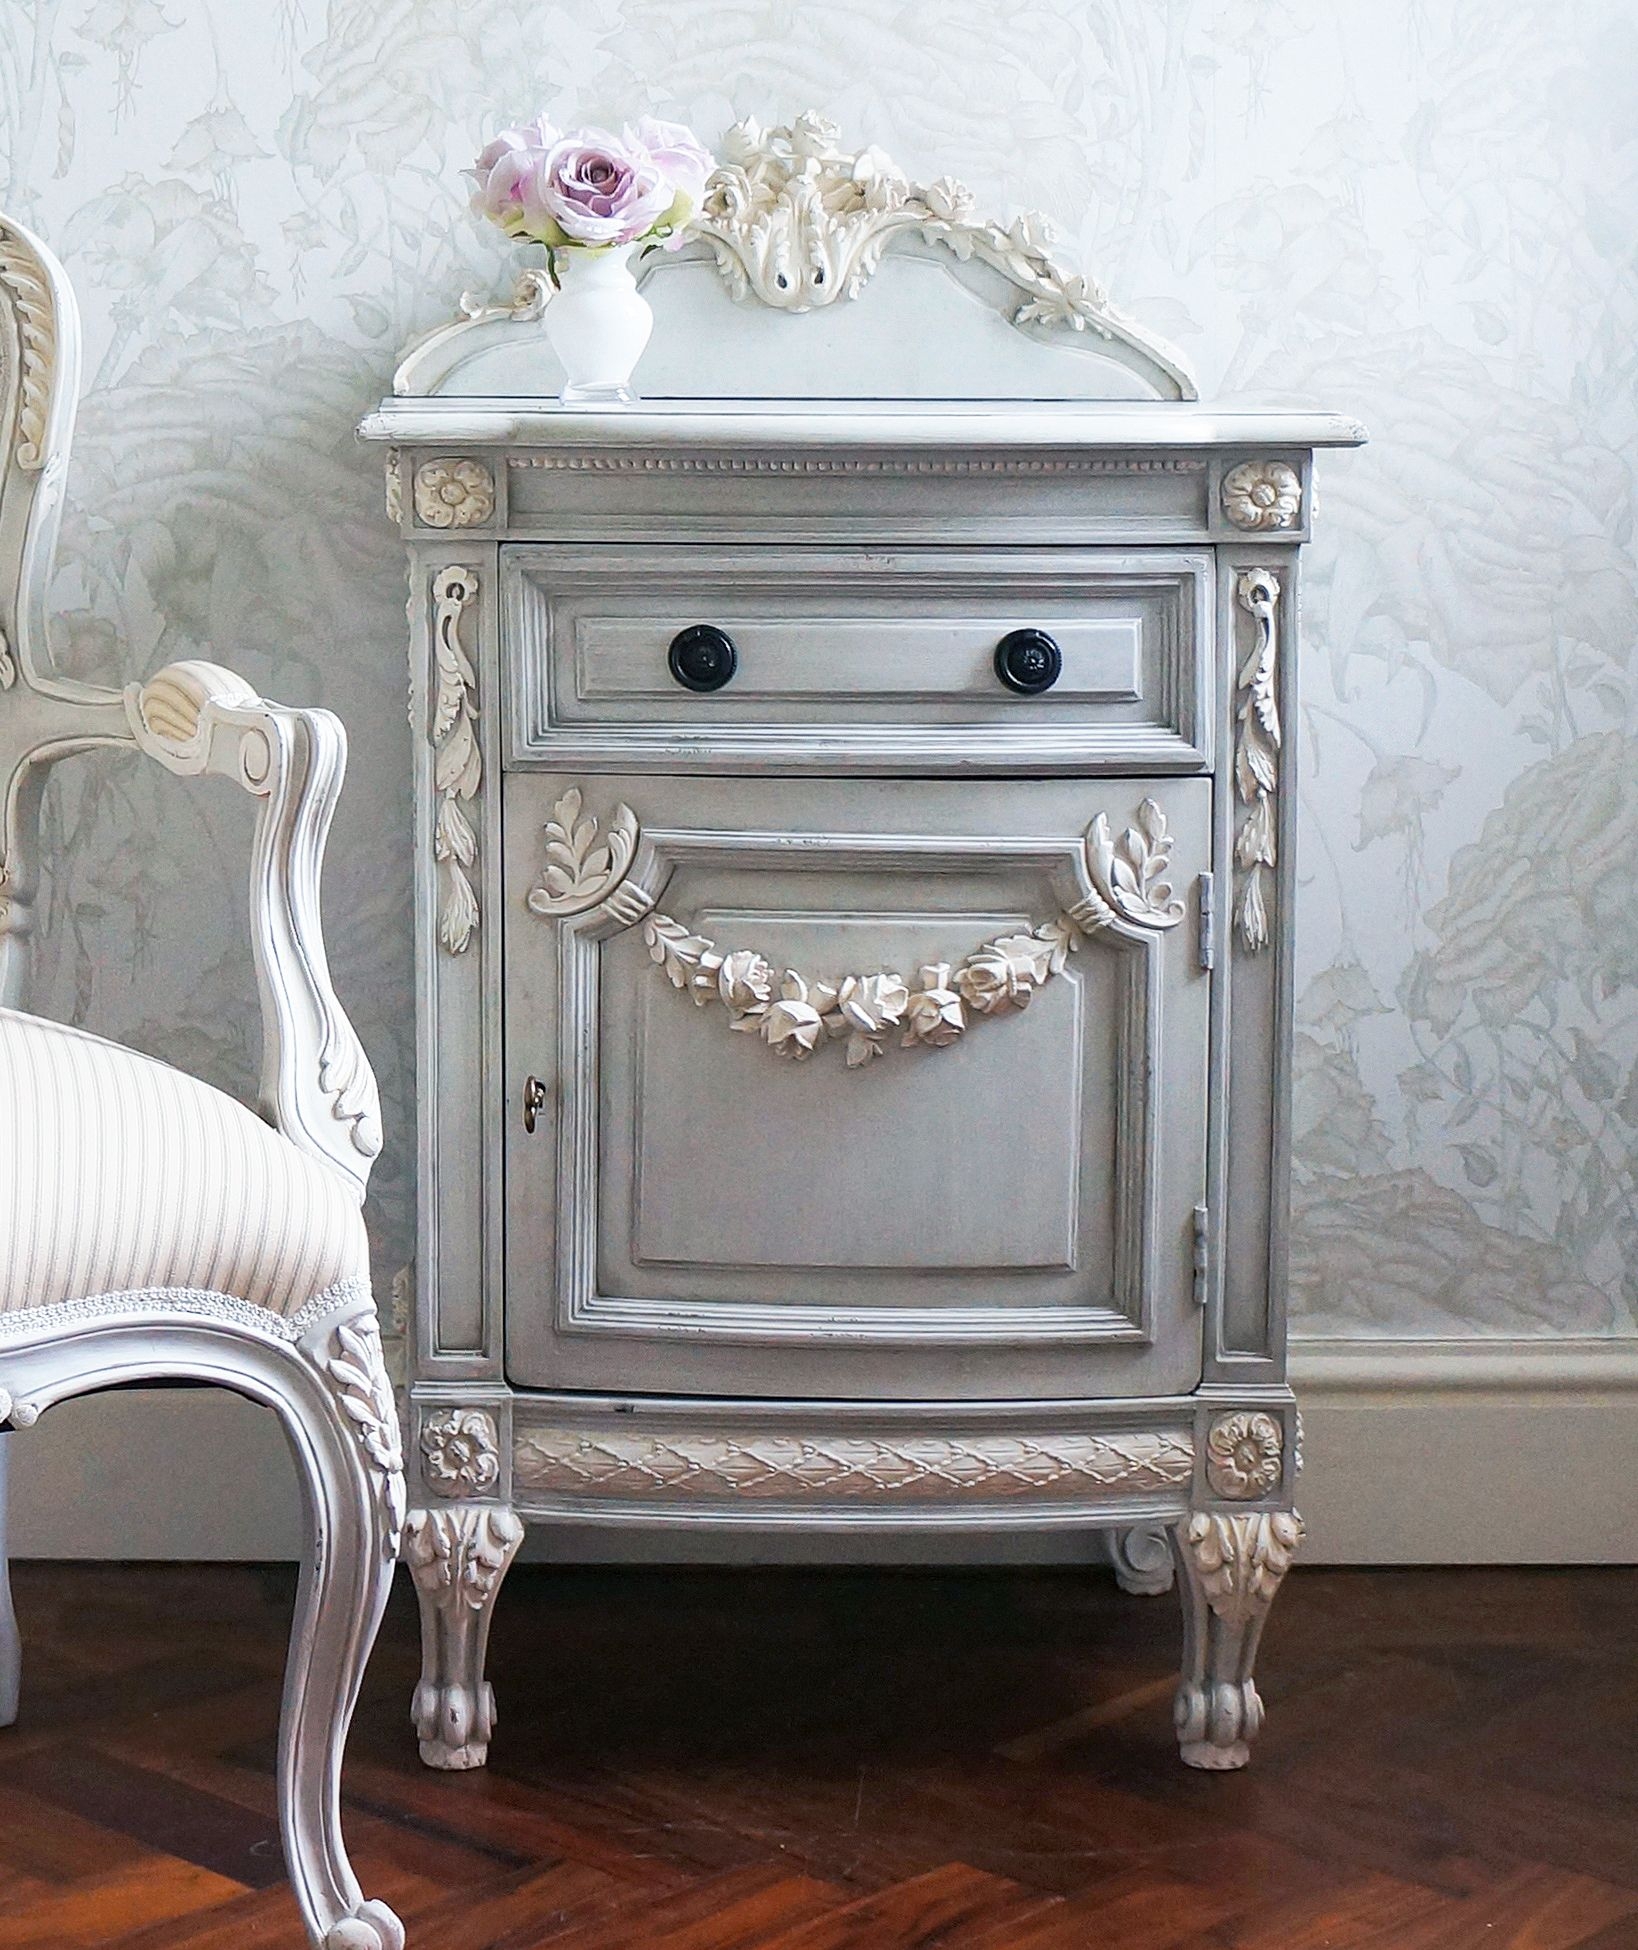 _0616 w144 h144 b0 p0 victorian nightstands and bedside tables